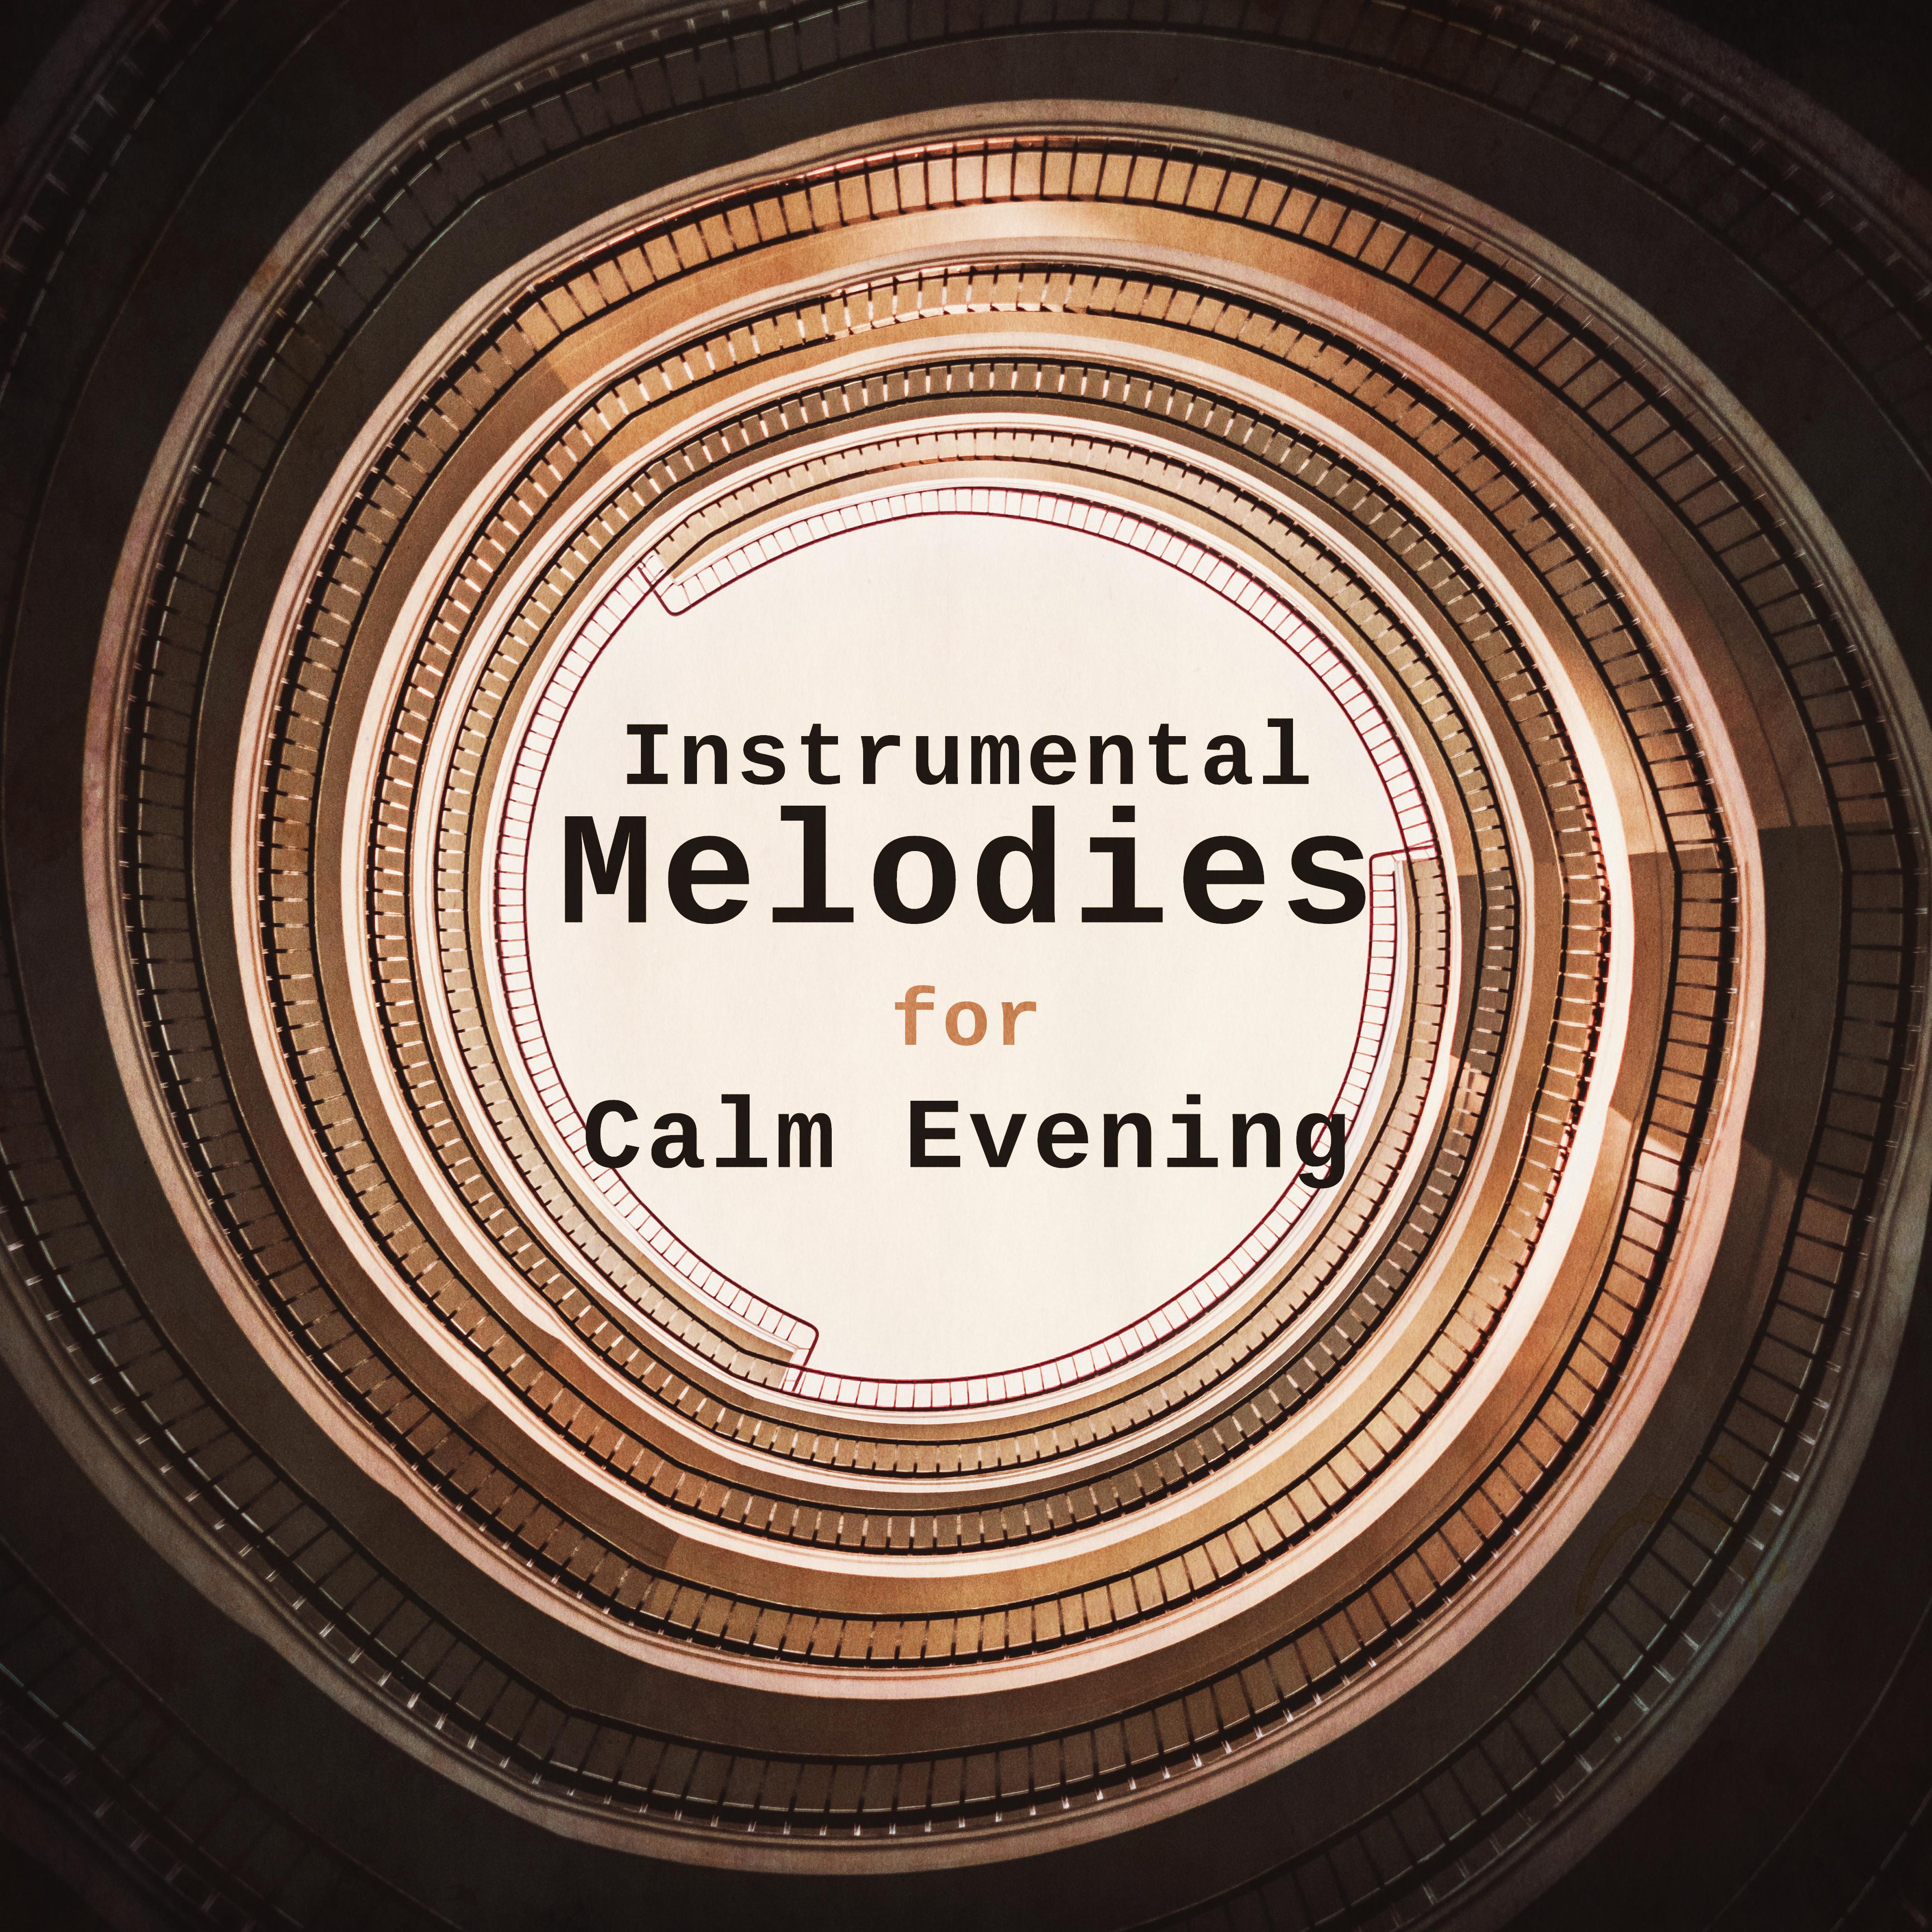 Instrumental Melodies for Calm Evening